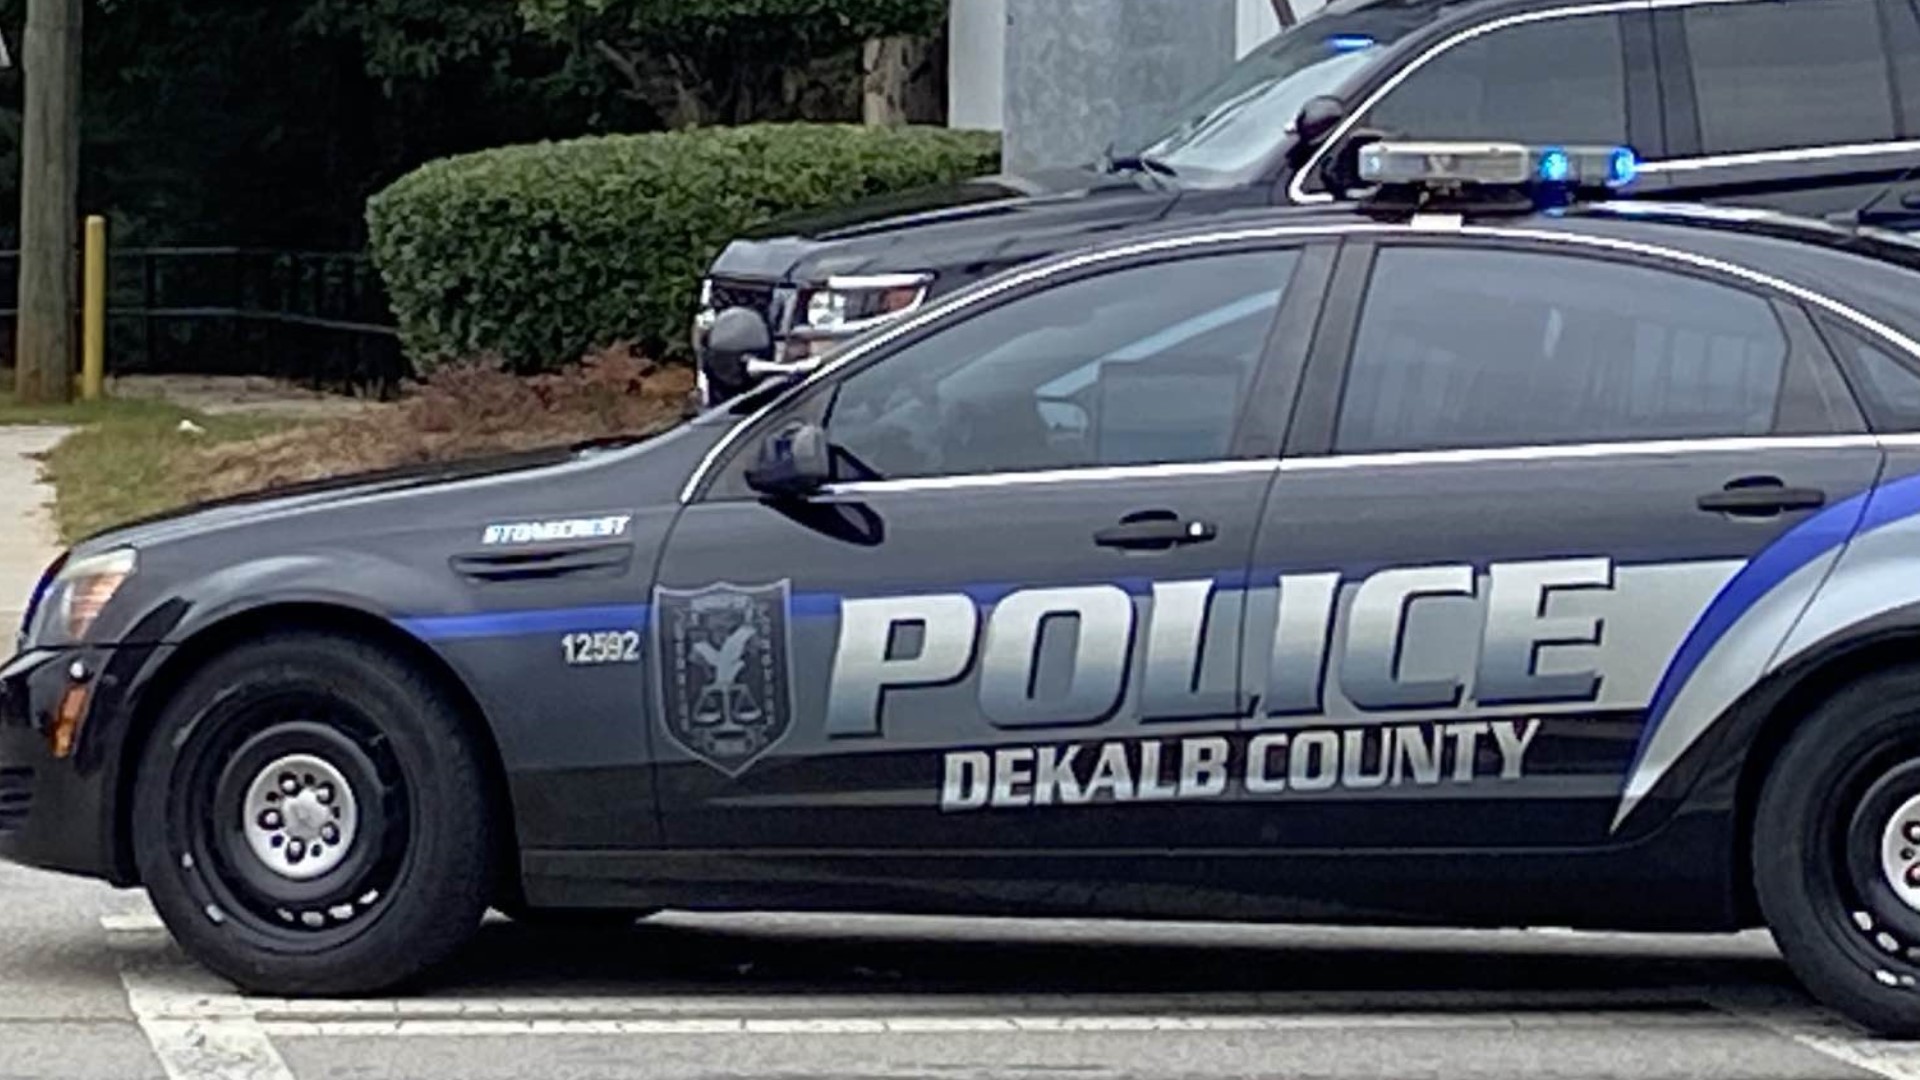 Three people are dead, including a child, after an apparent murder-suicide in DeKalb County Monday, the police department said.